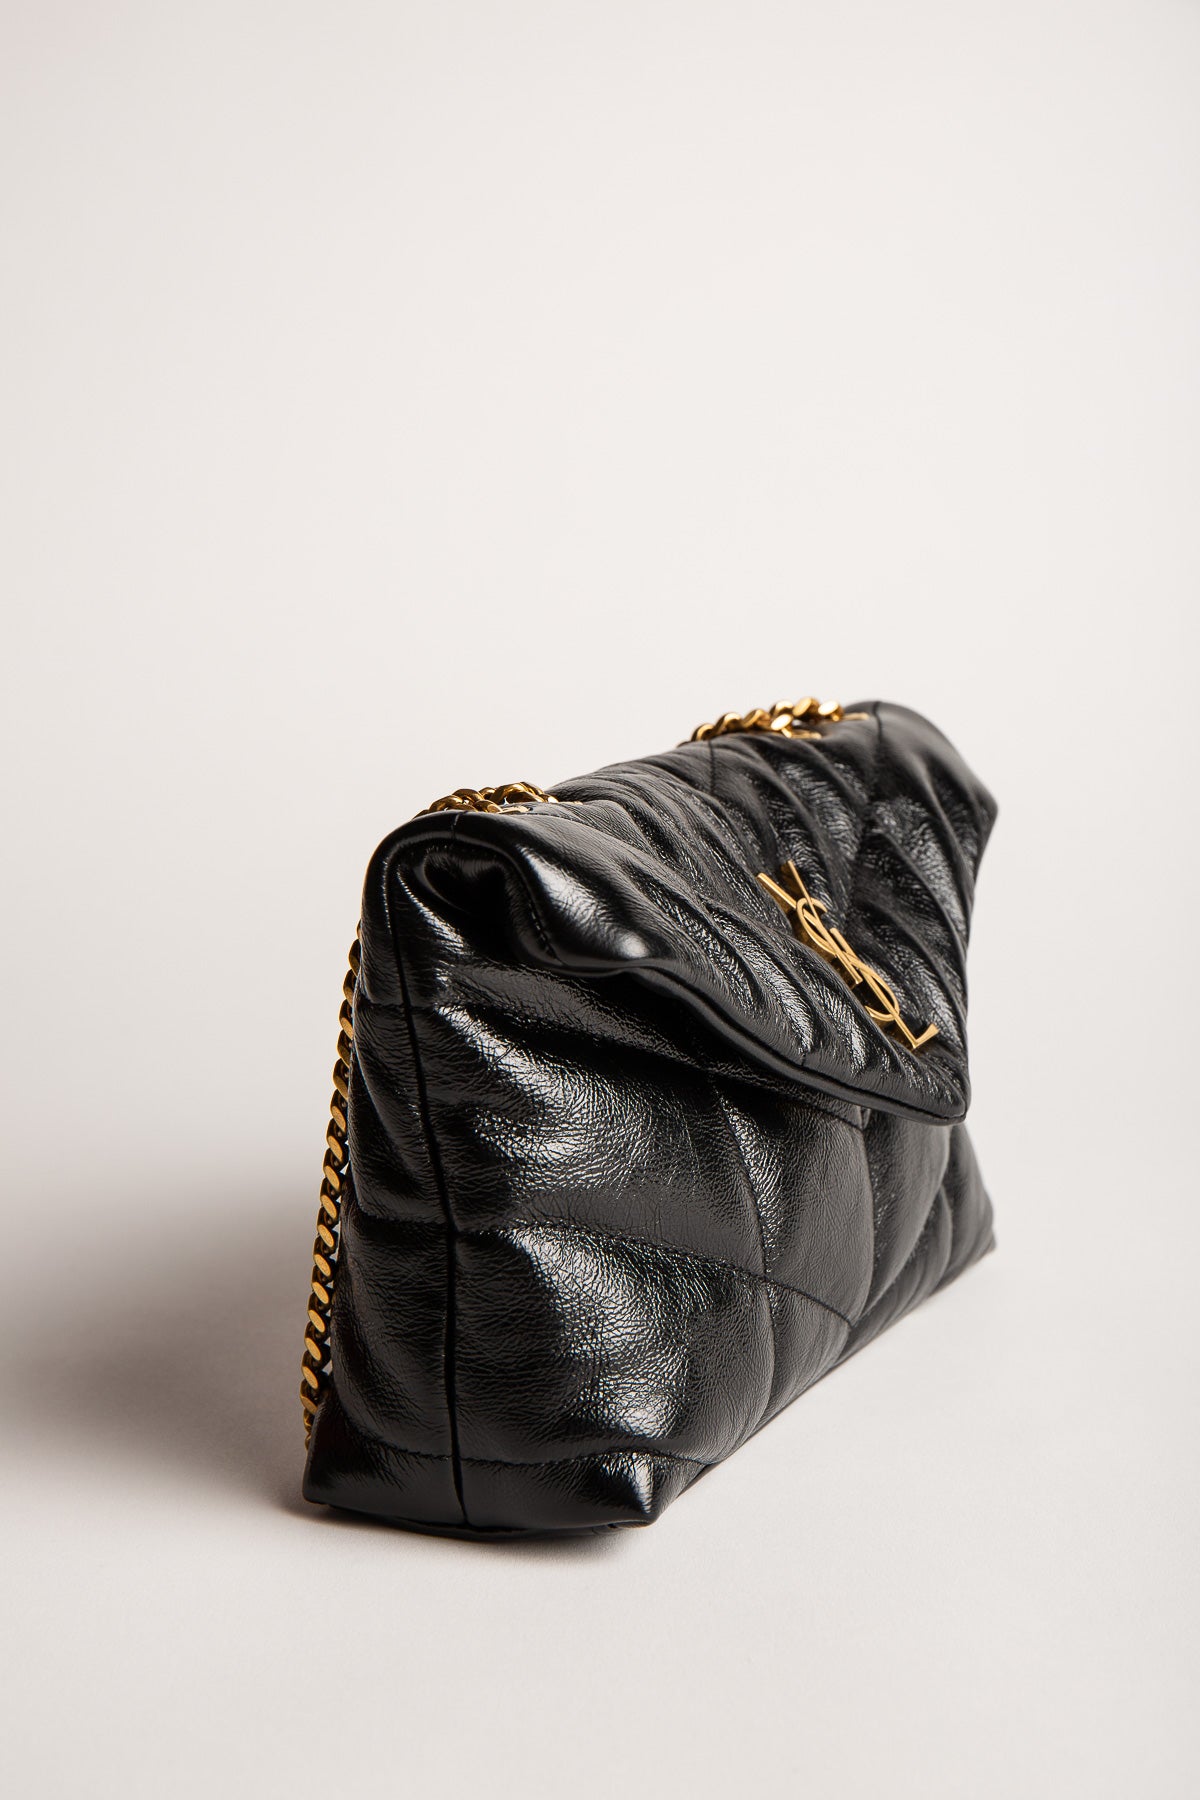 SAINT LAURENT | TOY PUFFER IN SHINY GRAINED LEATHER